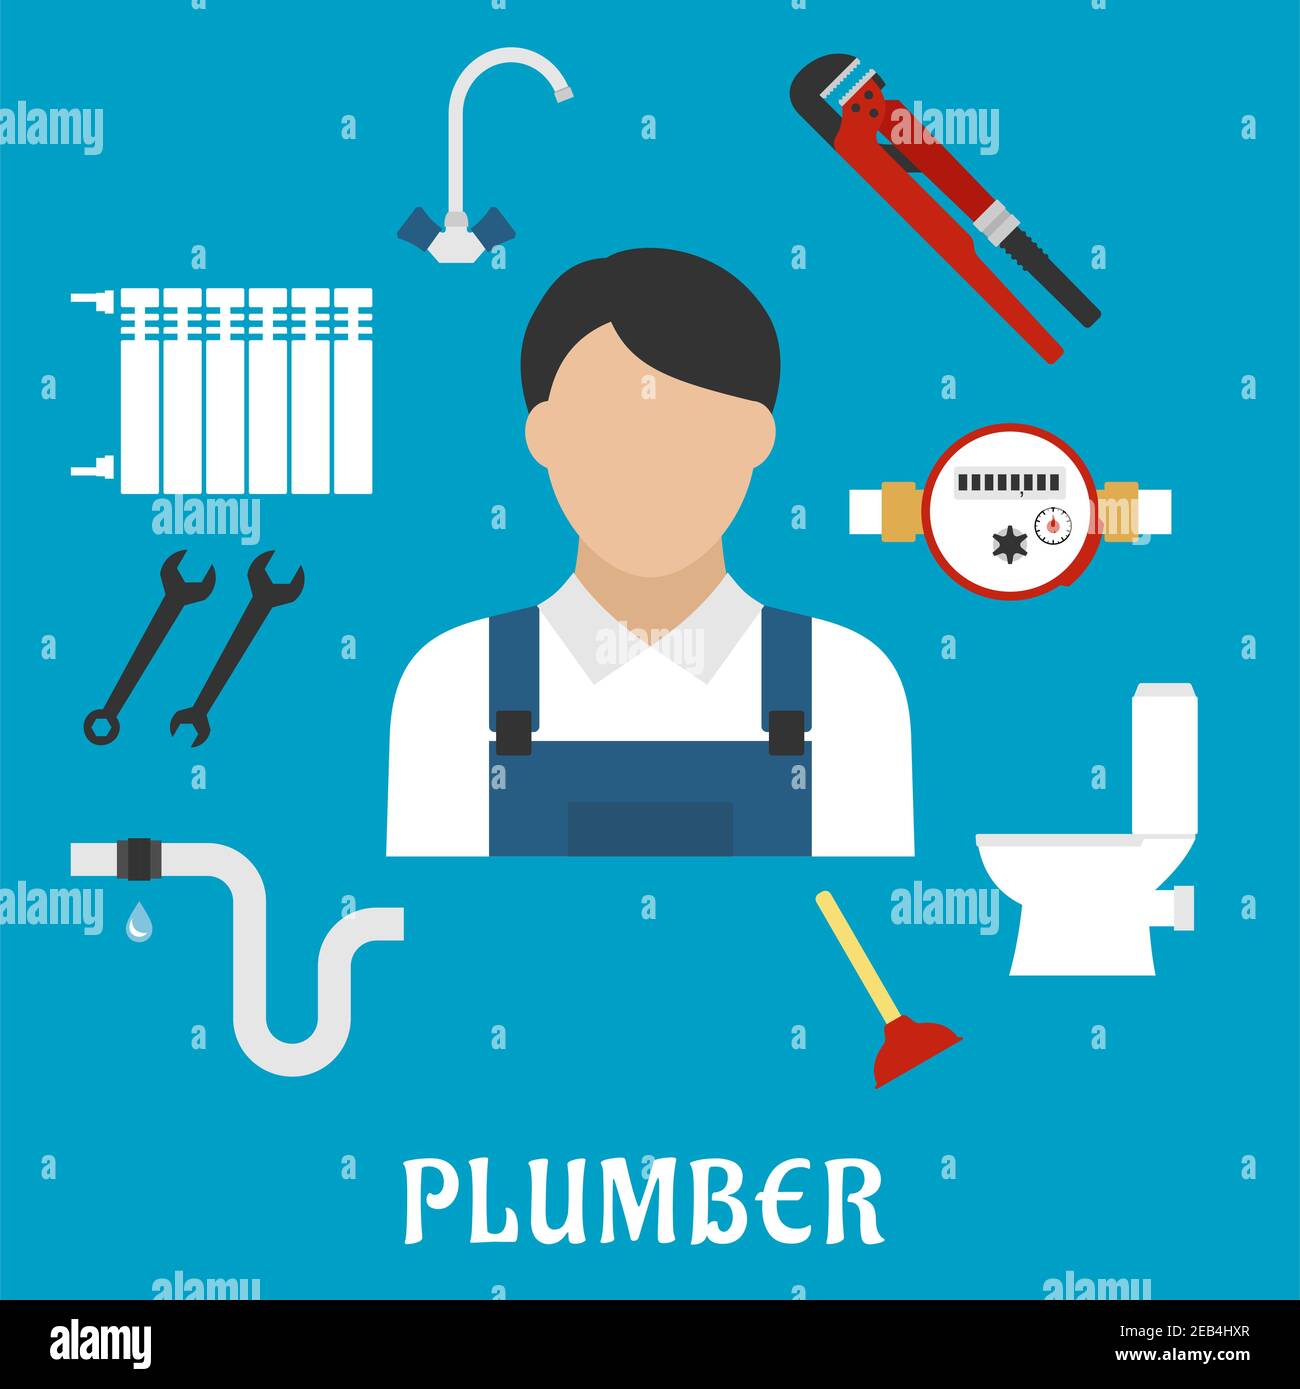 Plumber profession or service flat icons with radiator of heating system, water faucet and water meter, toilet, adjustable wrench, pipes system with l Stock Vector